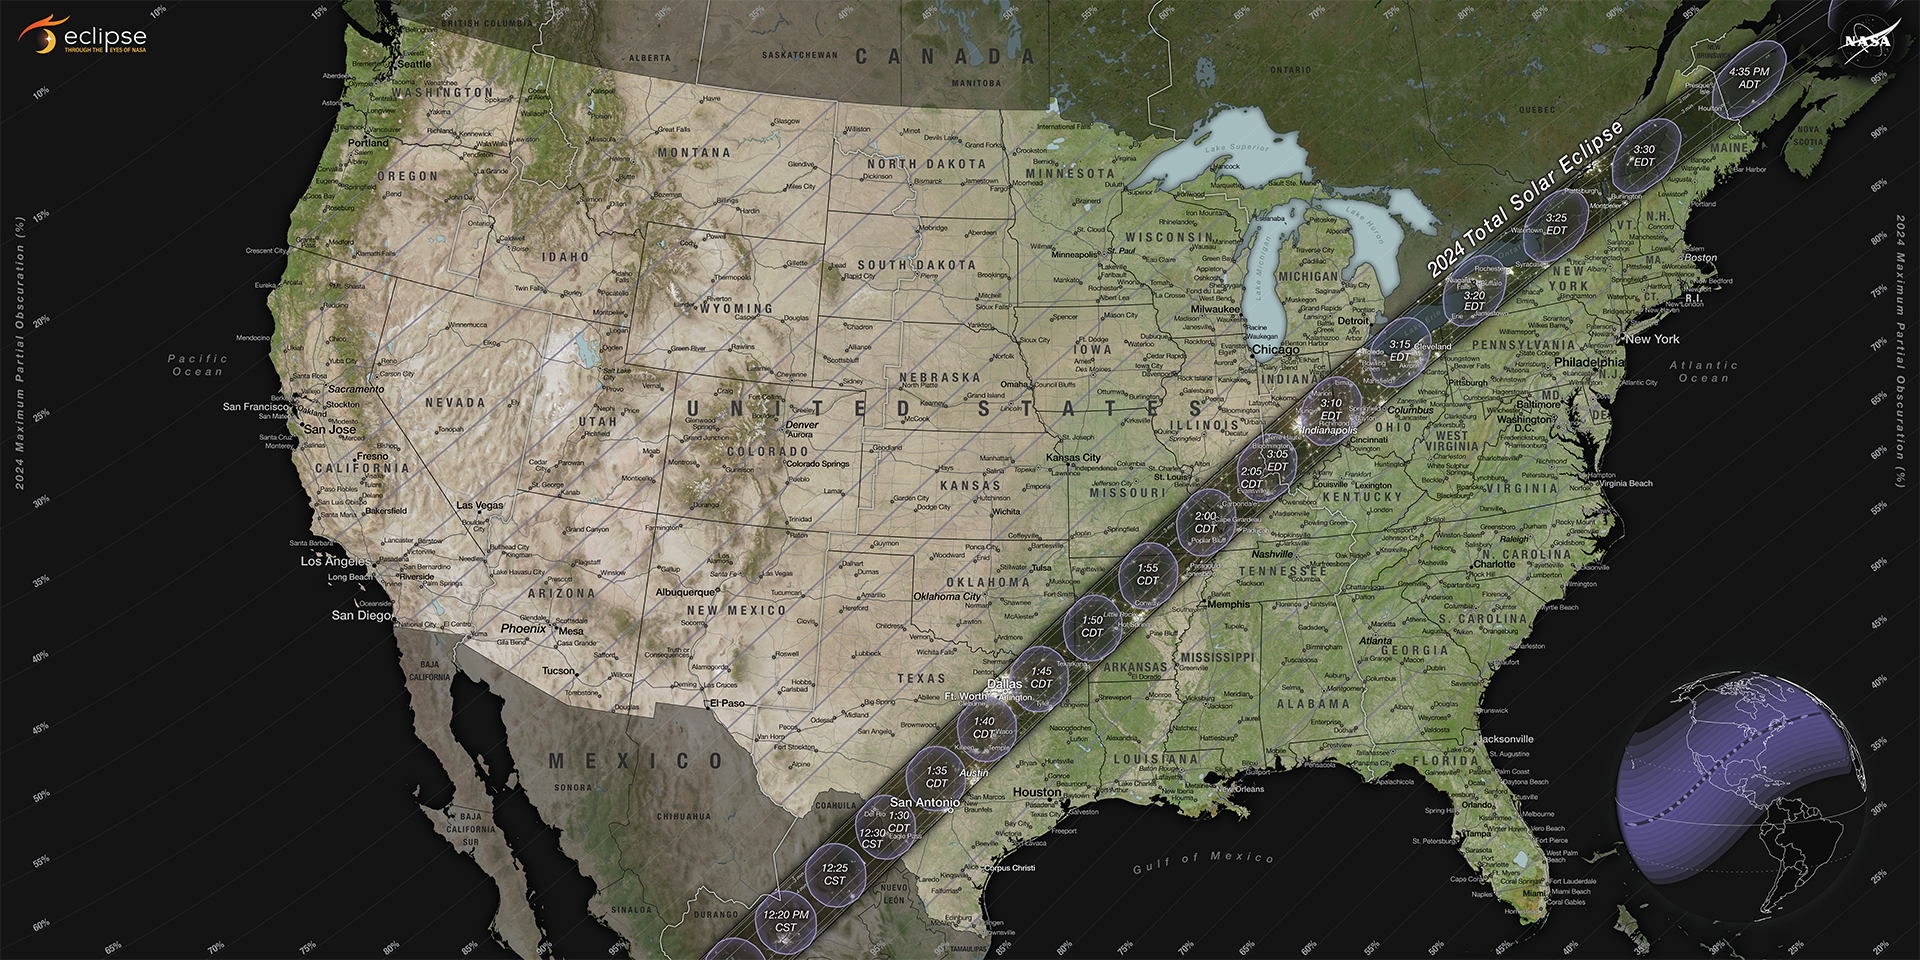 People along the path of totality stretching from Texas to Maine will have the chance to see a total solar eclipse; outside this path, a partial solar eclipse will be visible.